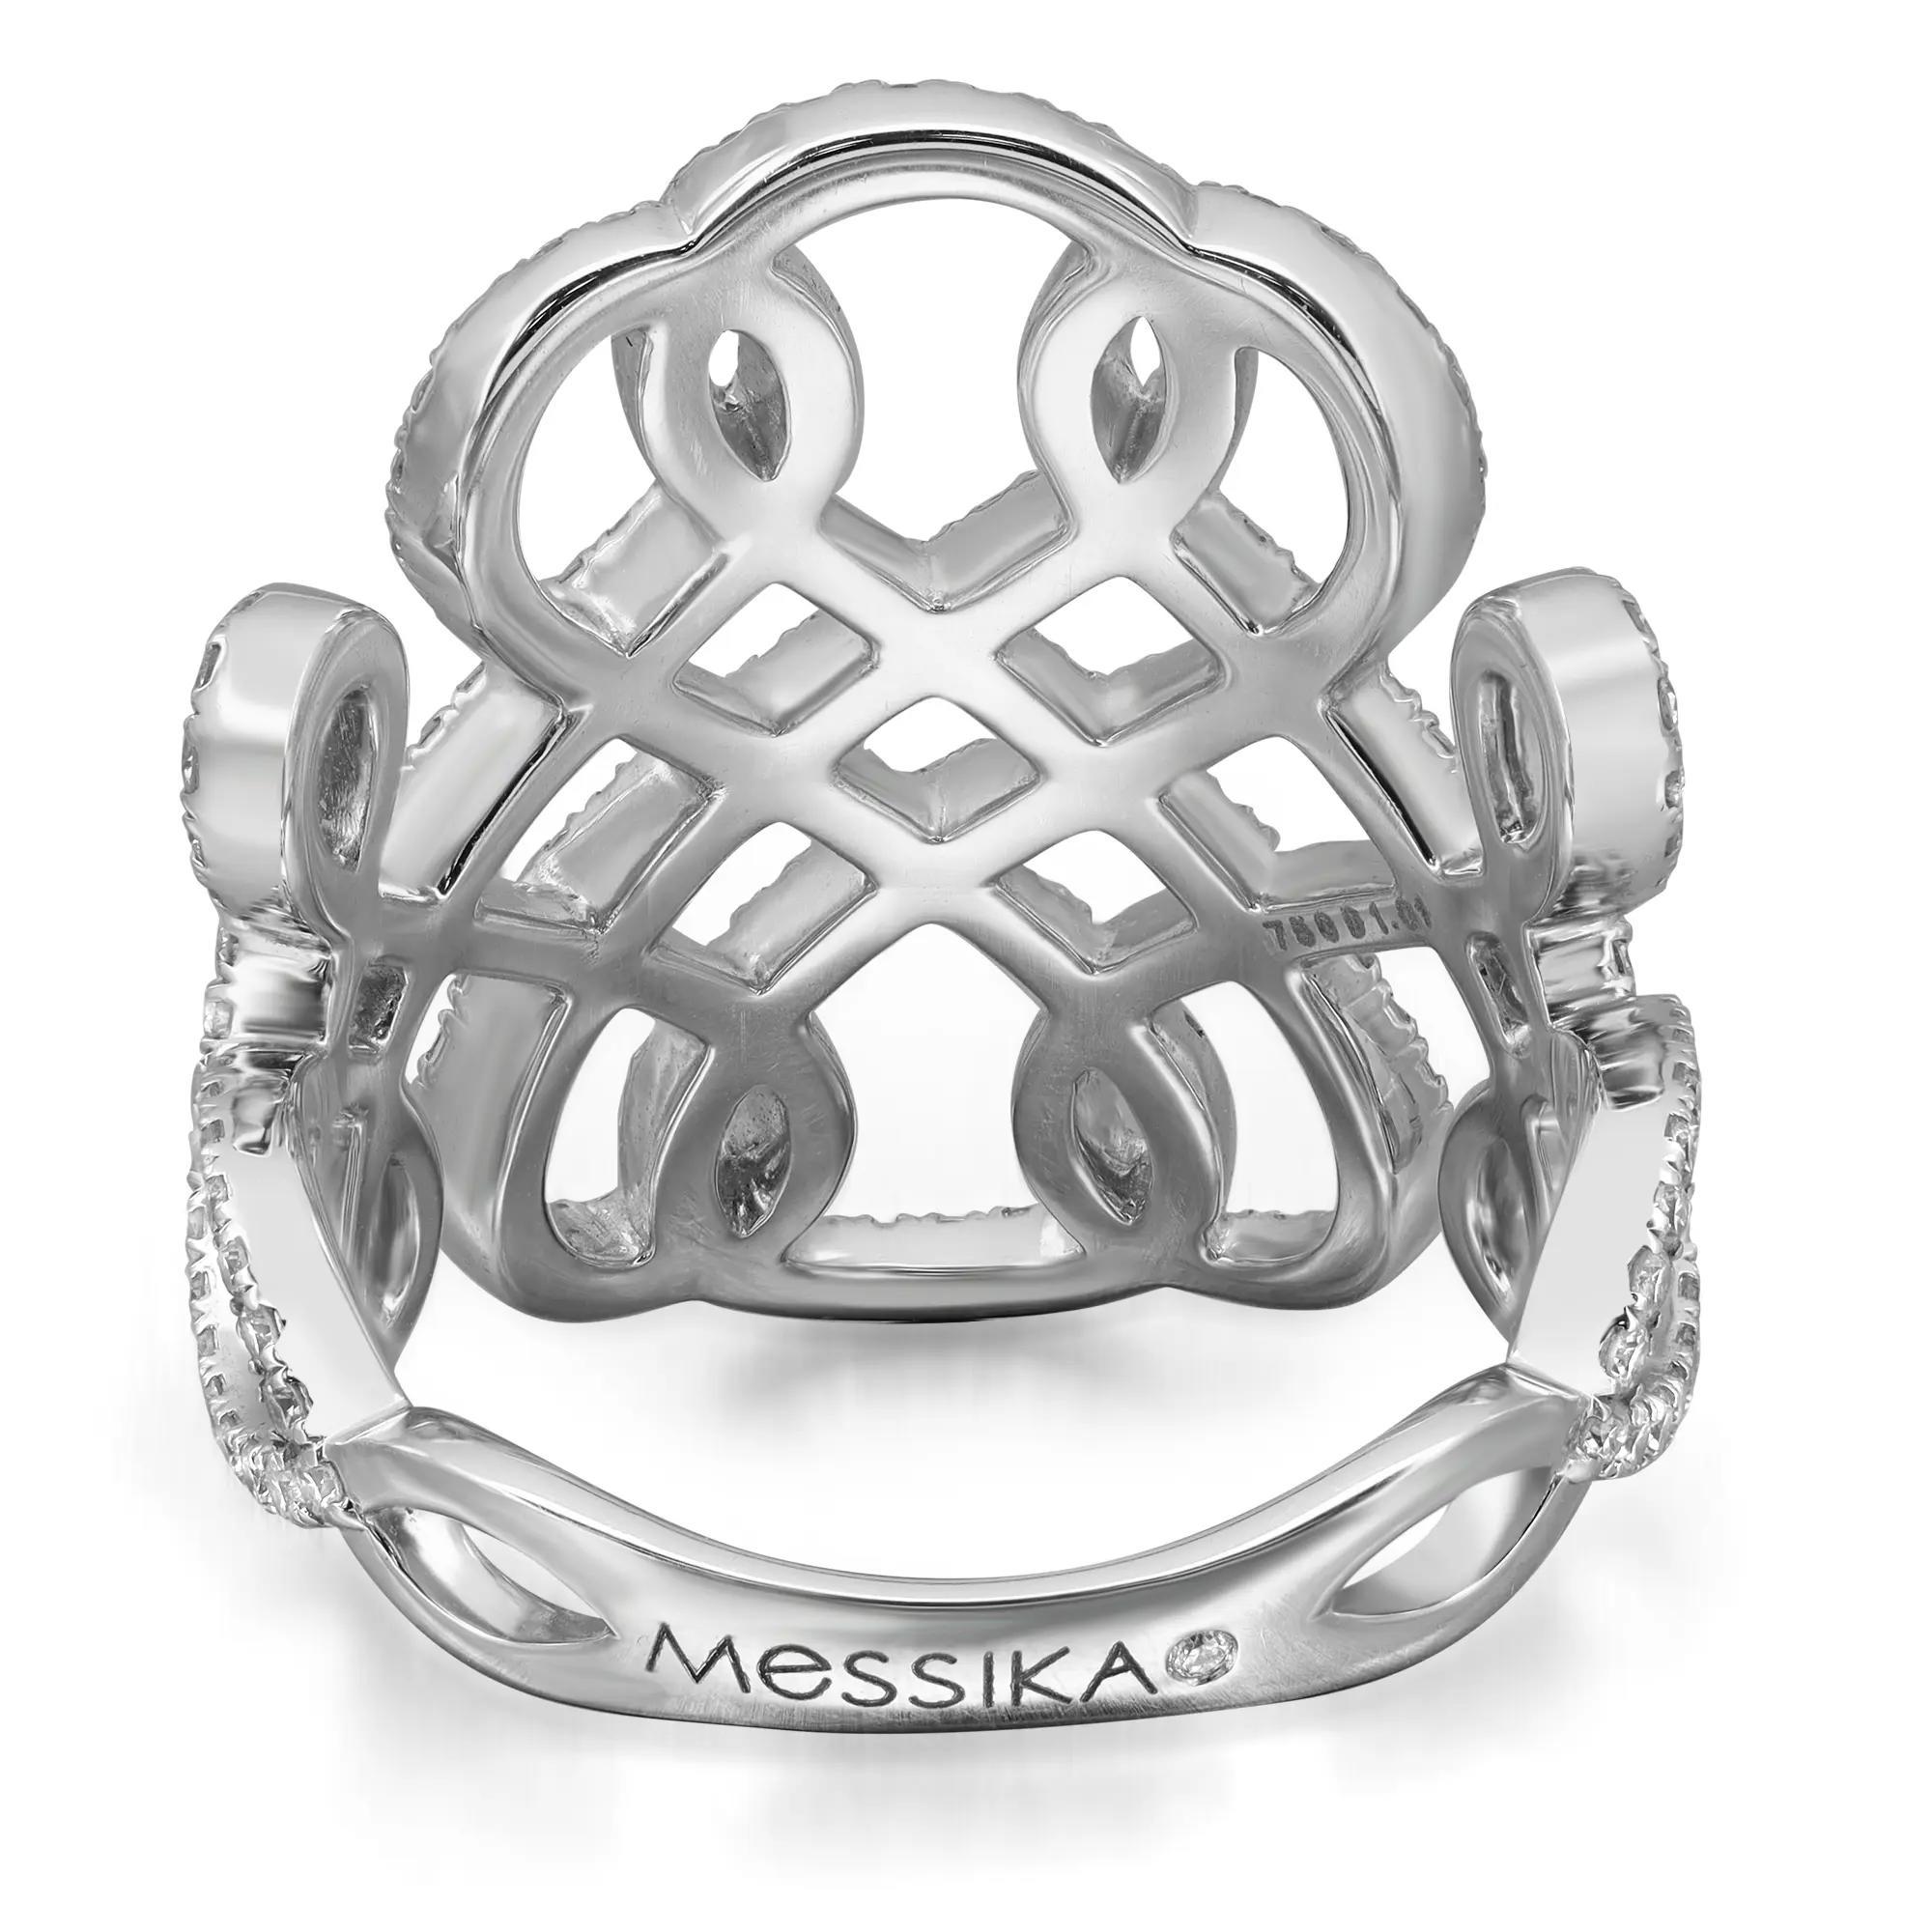 Dazzle away with this gorgeous Messika Promess wide band ring. Crafted in 18K white gold. Showcasing pave set round brilliant cut diamonds set in a spiral pattern weighing 1.00 carats. Diamond quality: G color and VS clarity. Ring size: 53 US 6.5.